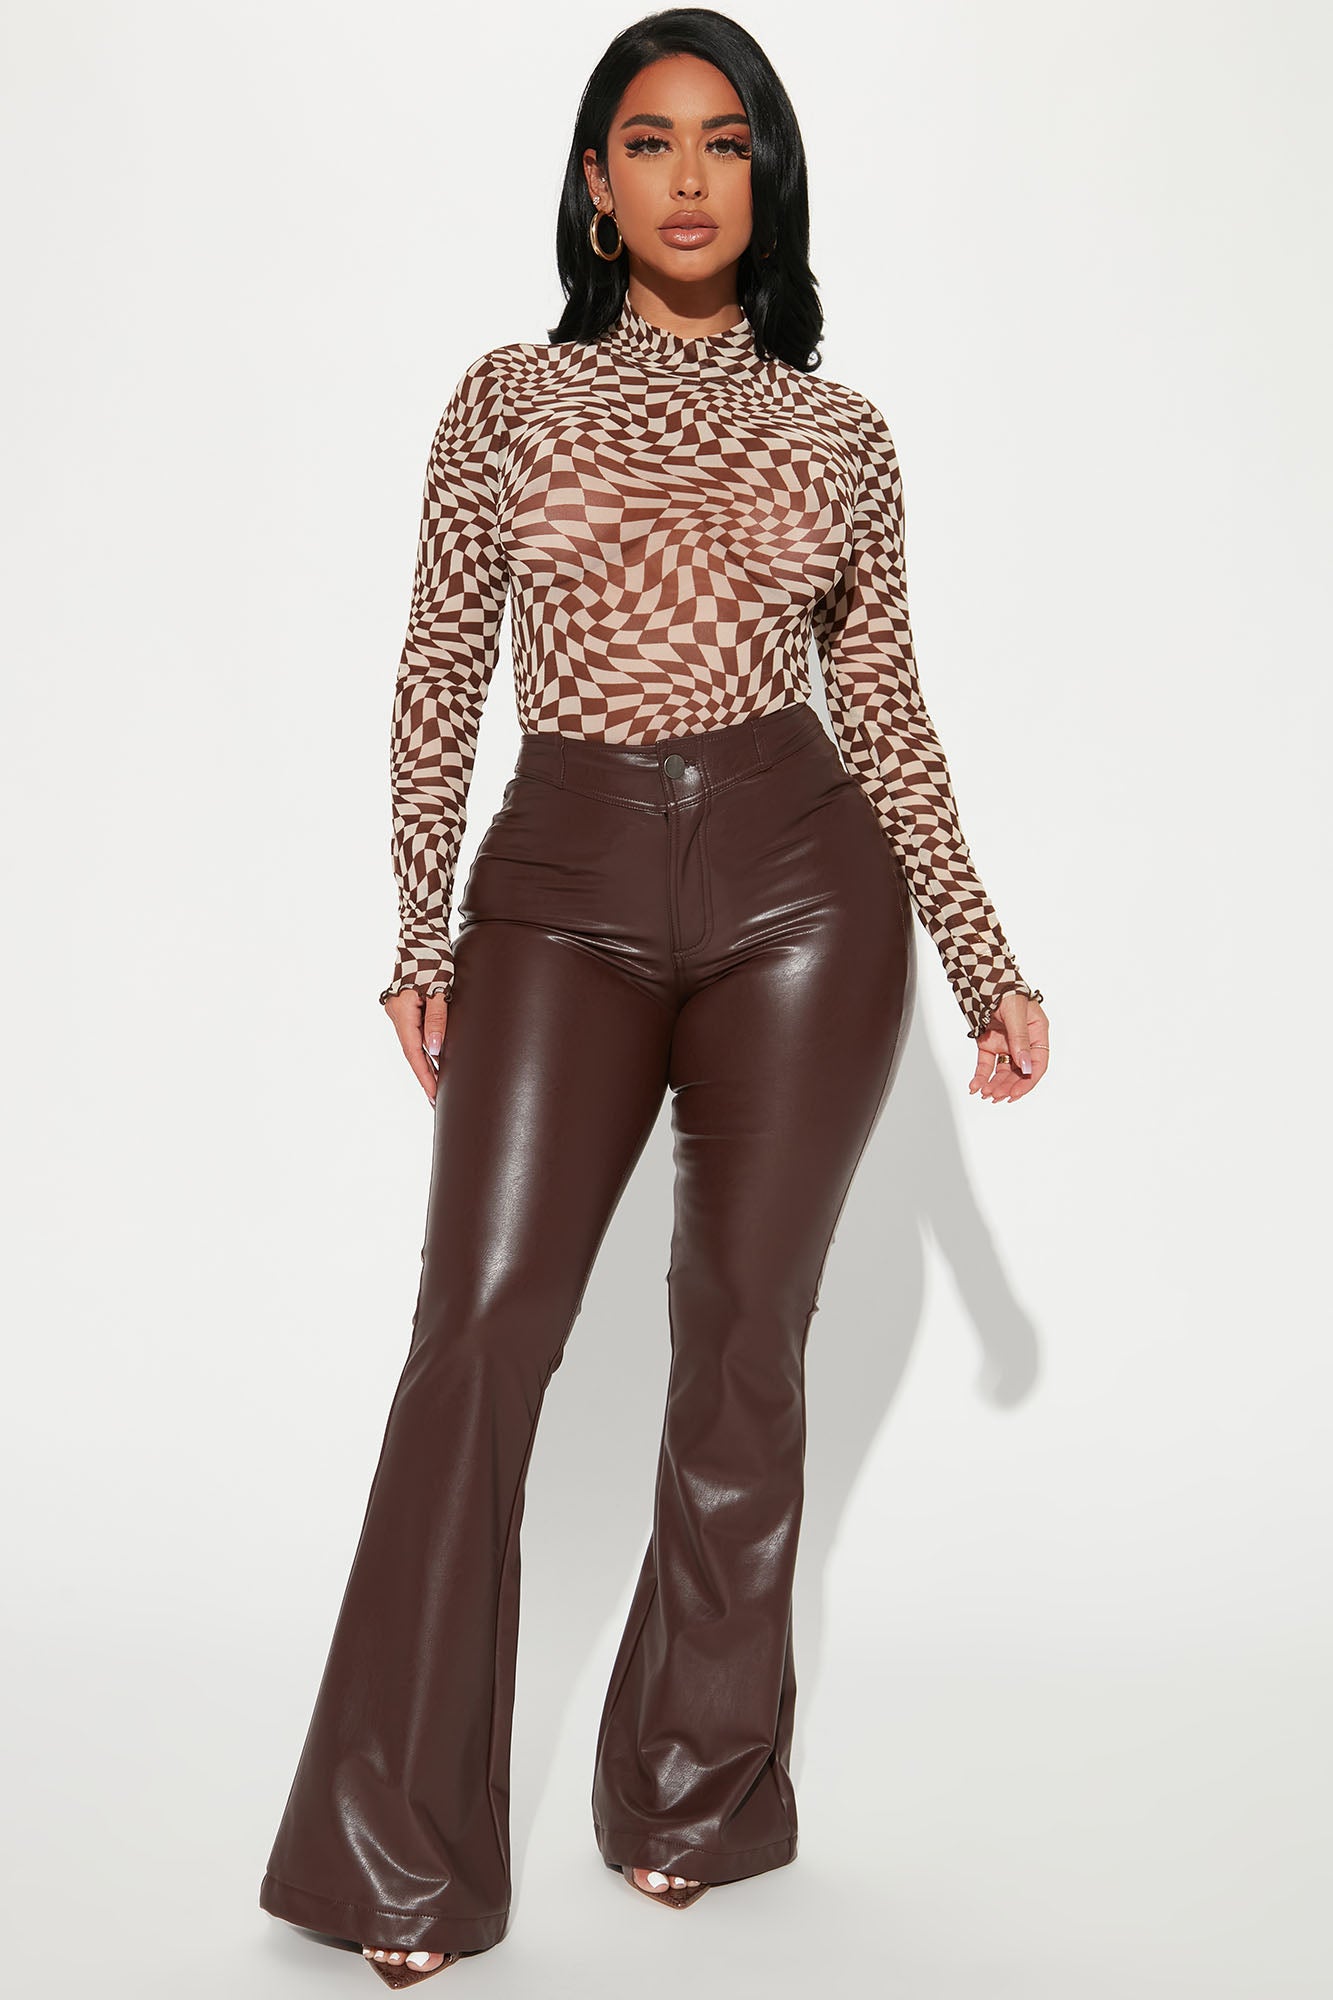 Topshop Faux Leather Pants Make Wearing This Trend Super Comfy | Us Weekly